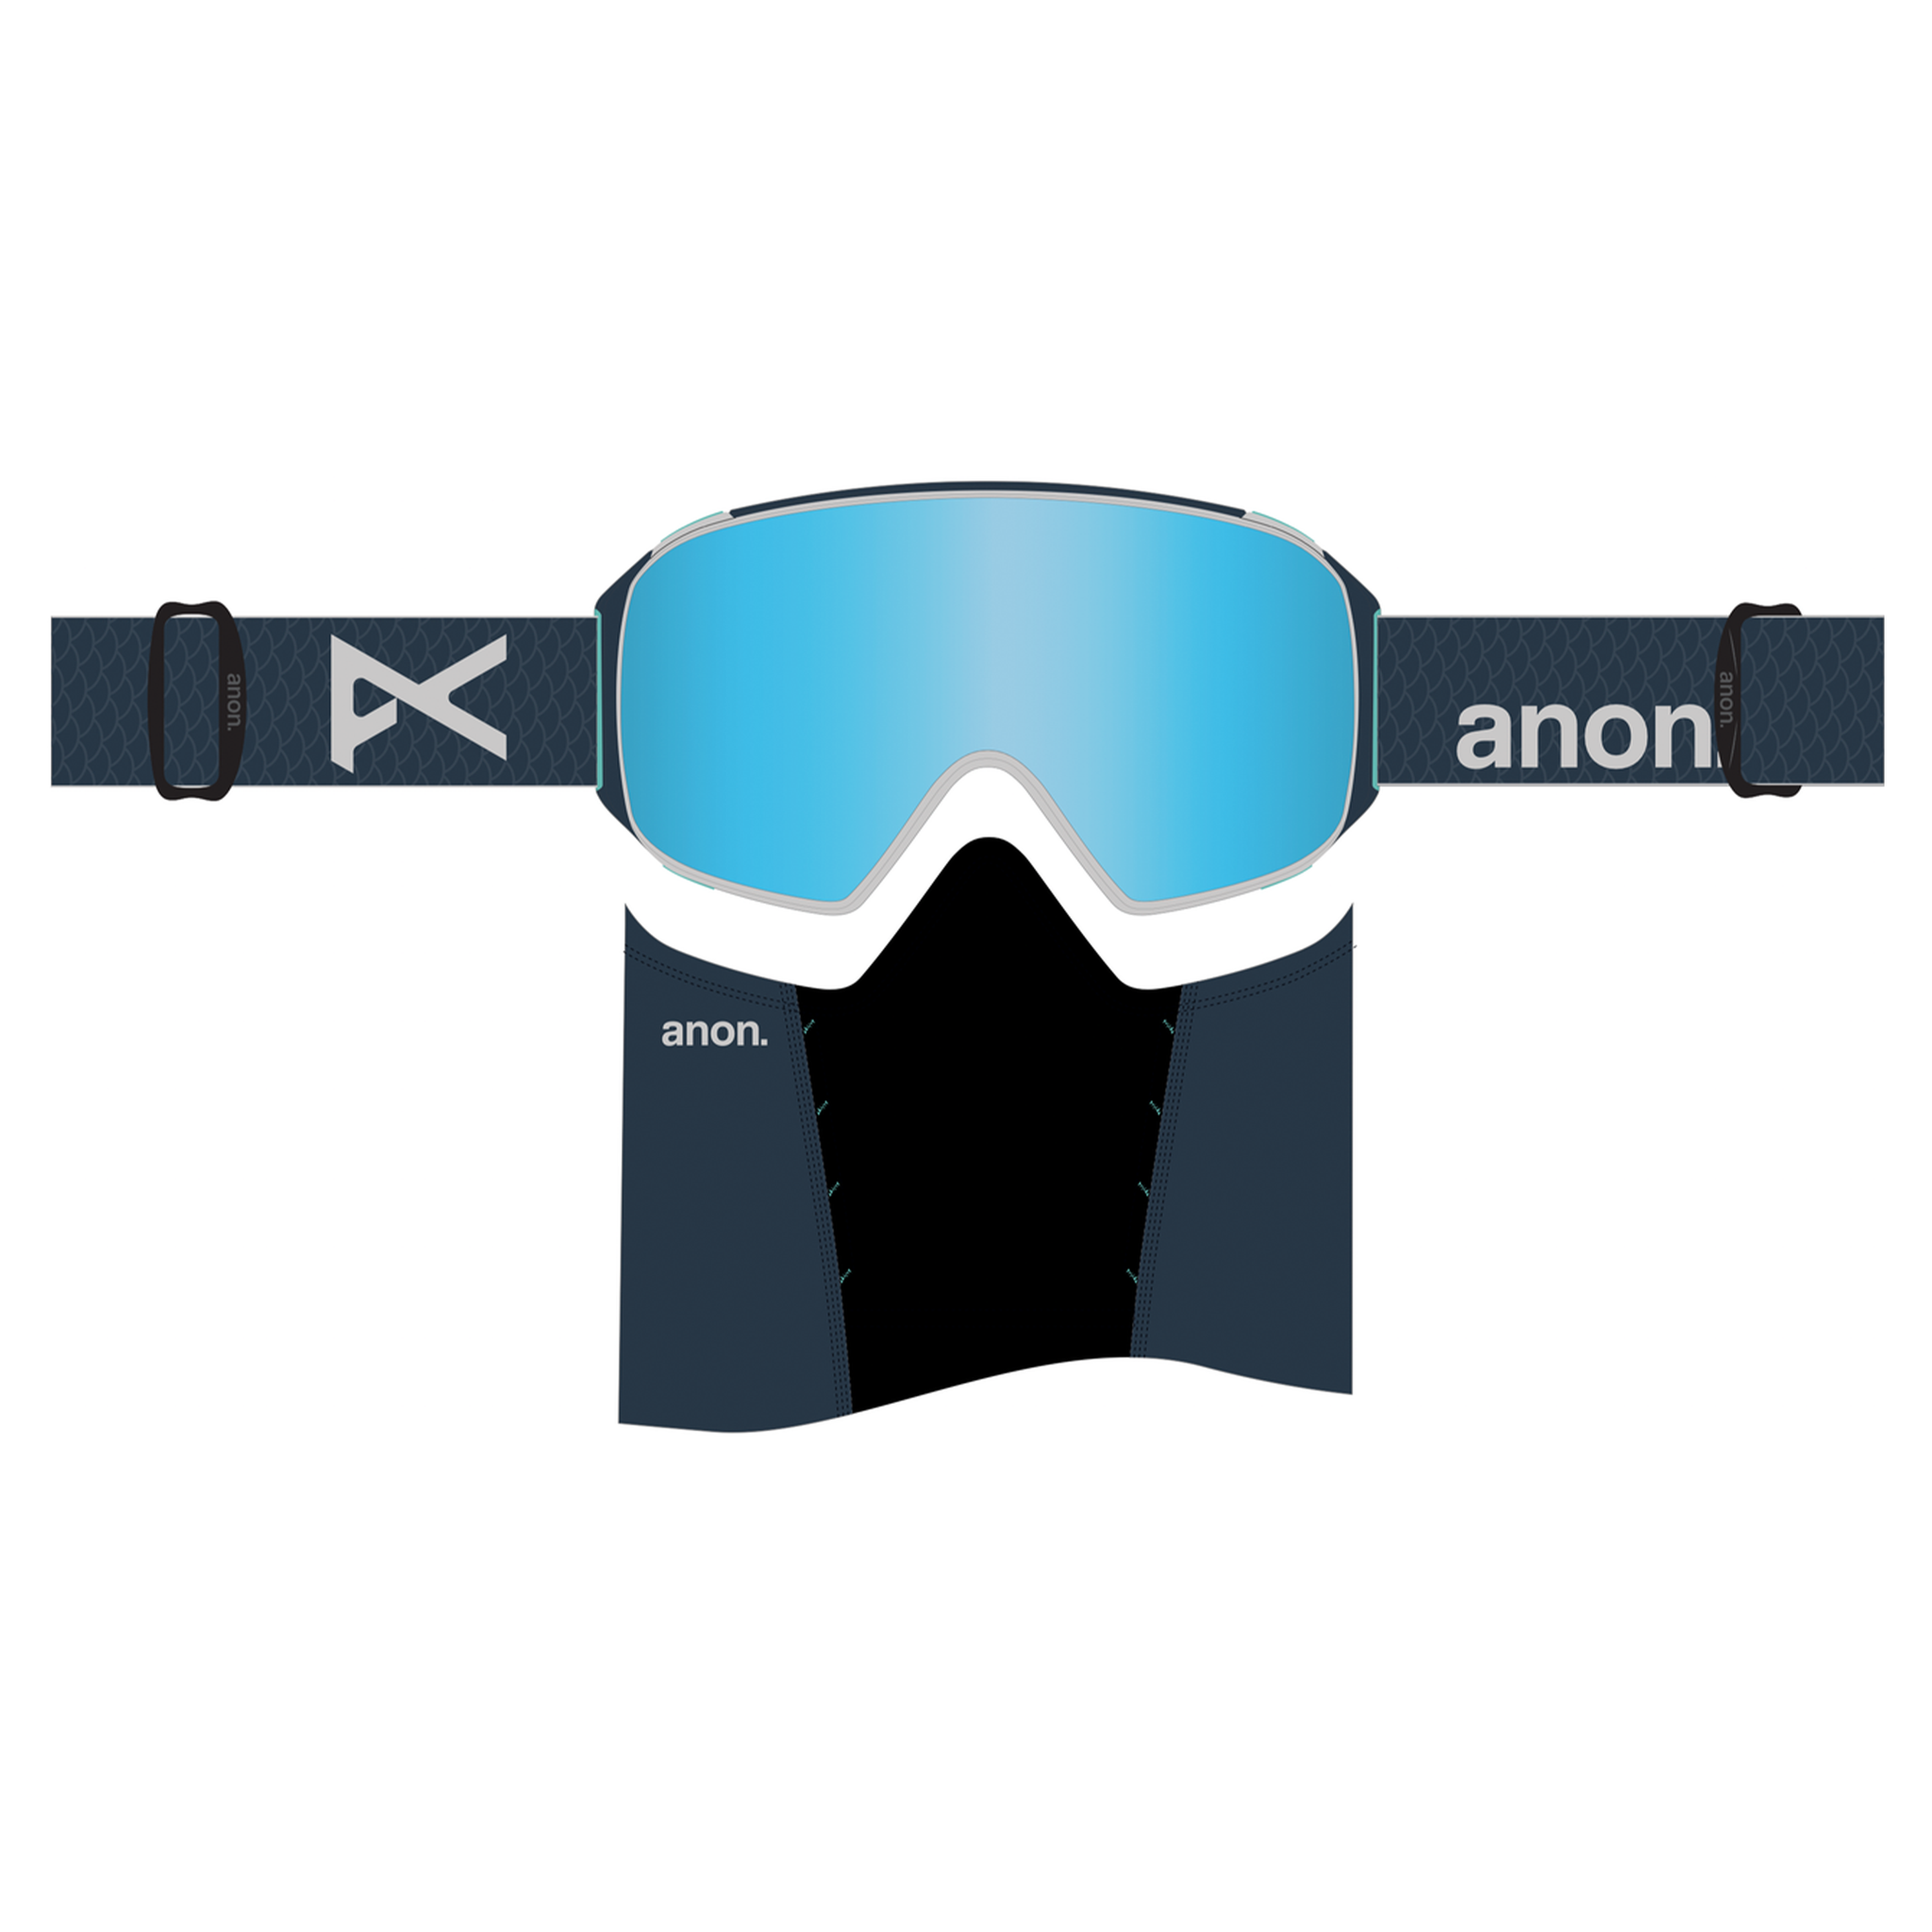 ANON M4 CYLINDRICAL GOGGLES - NIGHTFALL/PERCEIVE VARIABLE BLUE (LOW BRIDGE) +MFI MASK + SPARE LENS